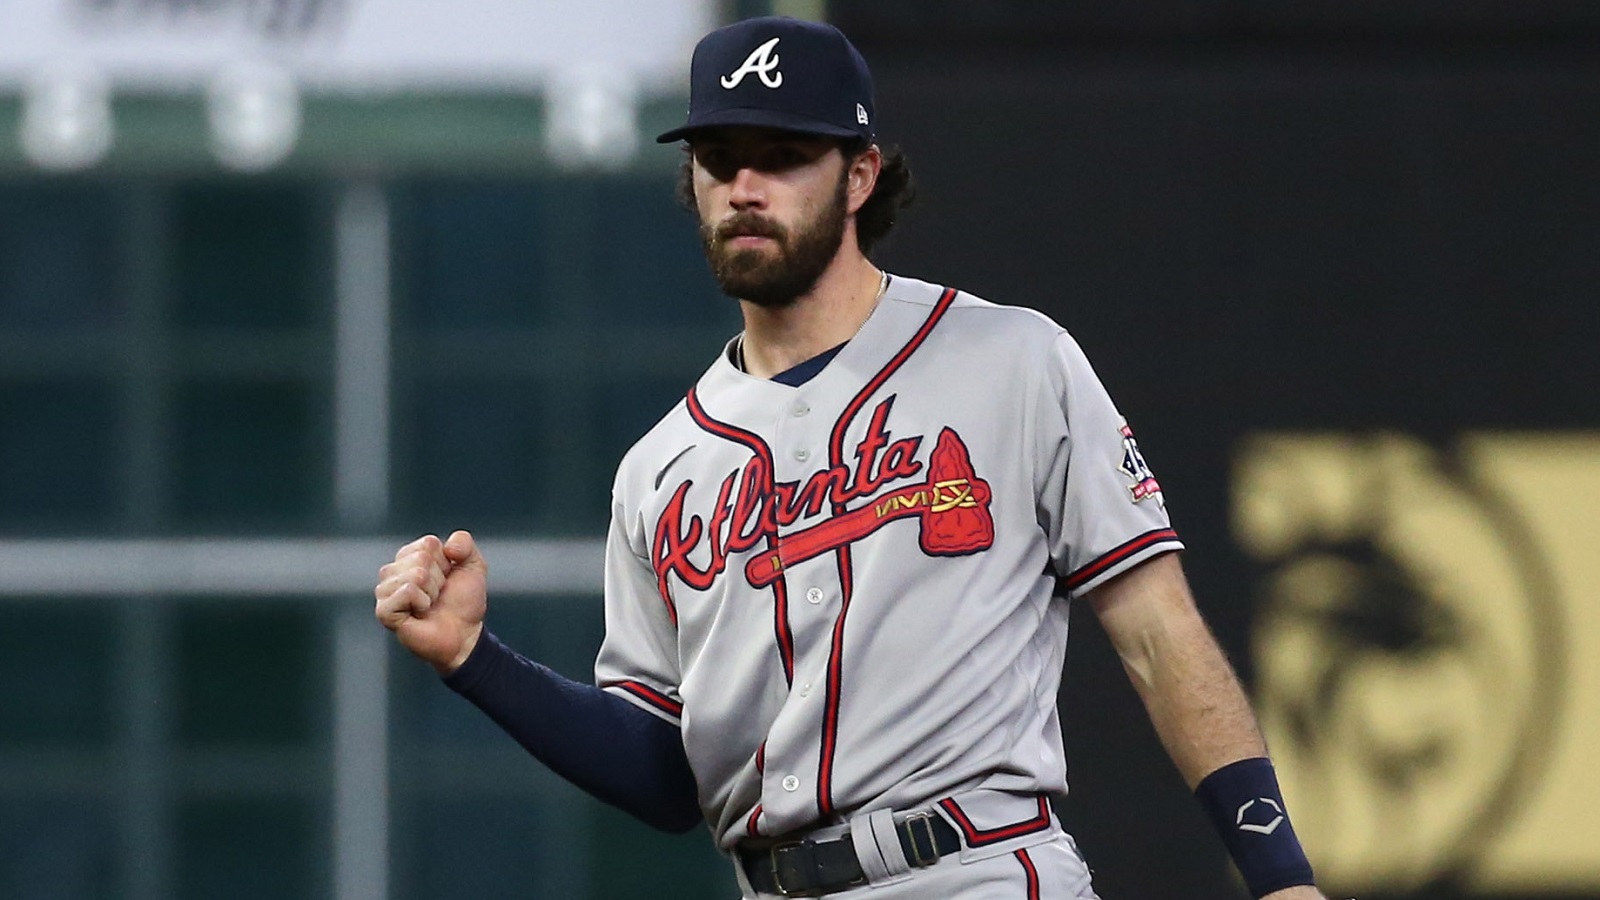 Dansby Swanson thanks Braves fans after signing with Chicago Cubs